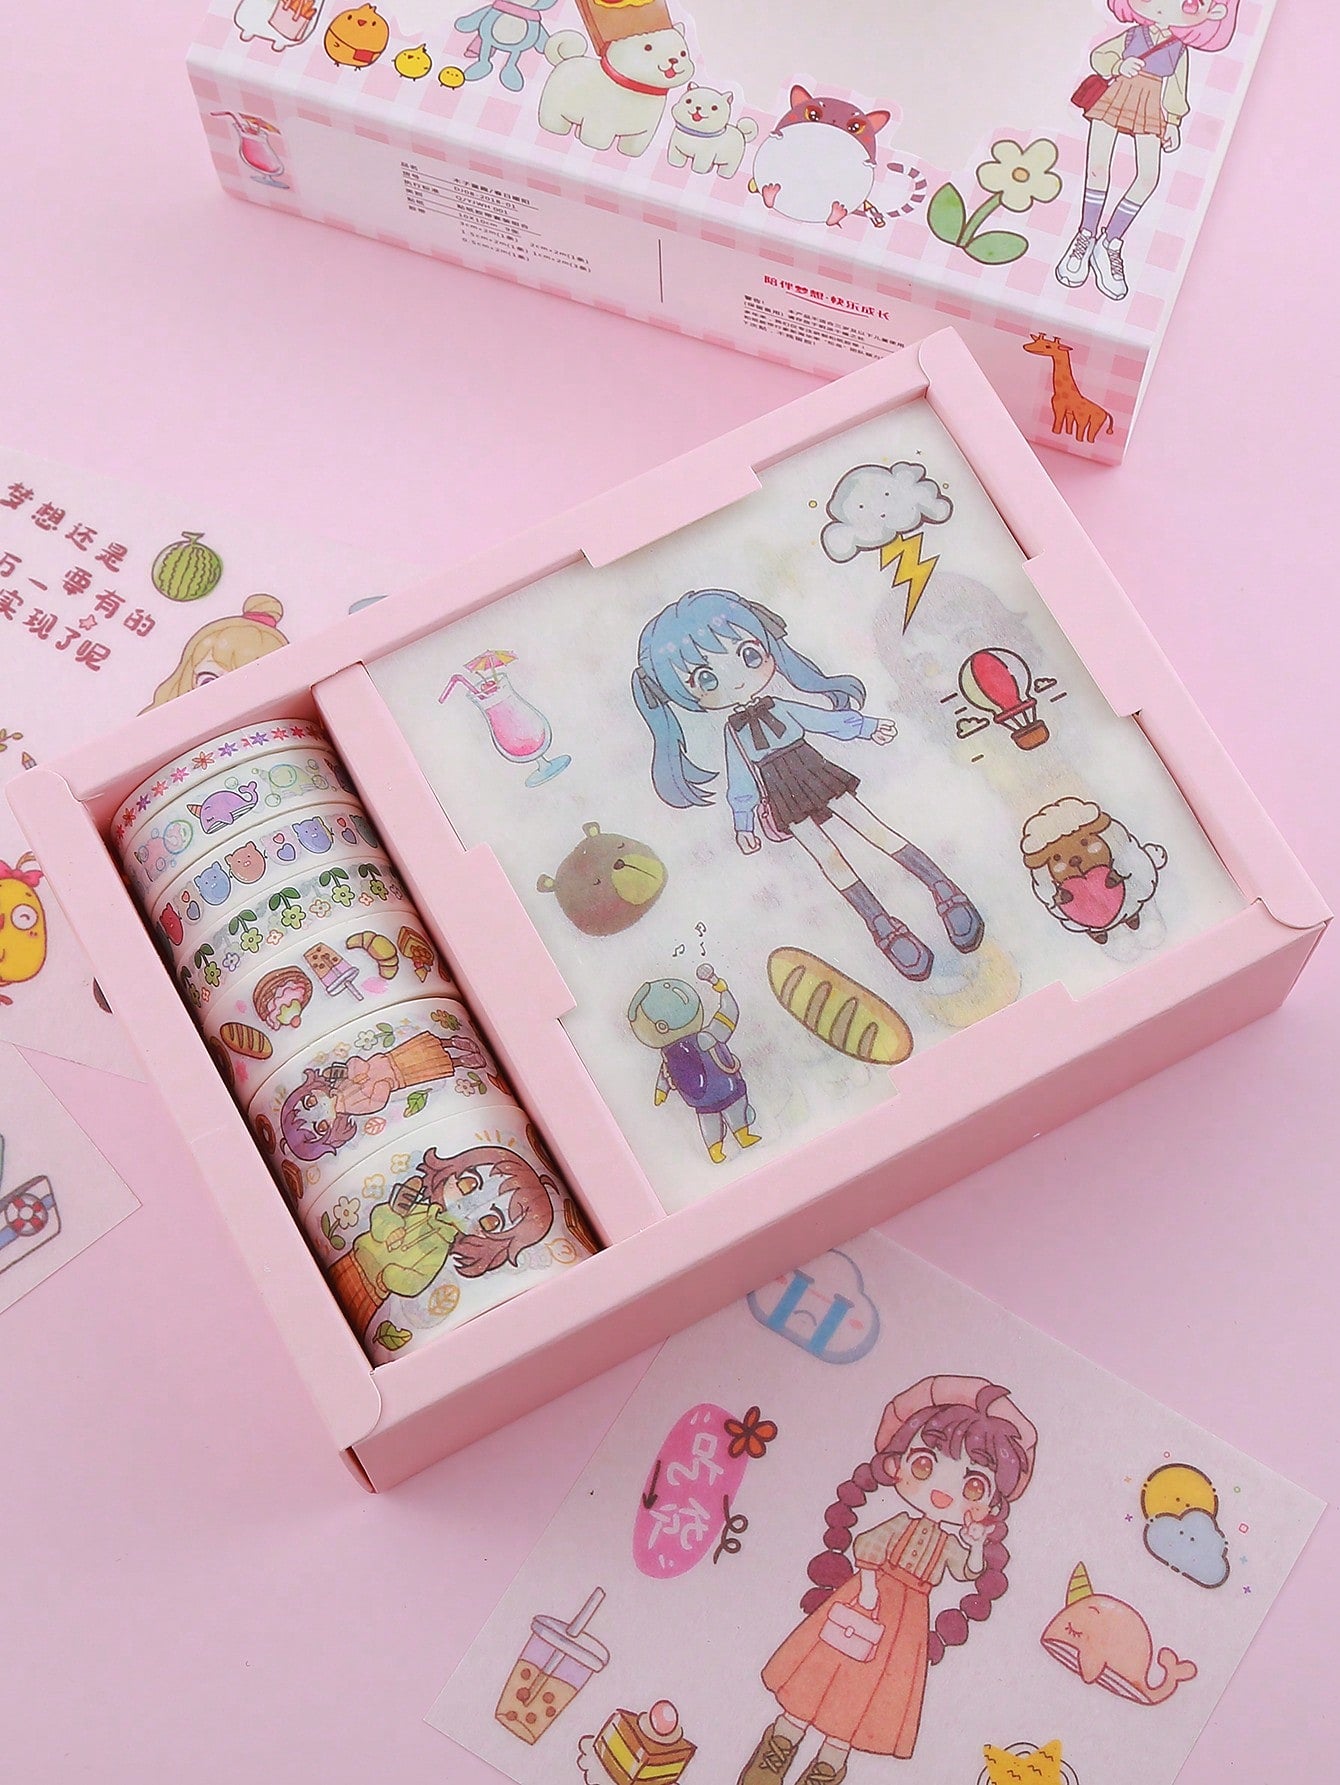 1 Box(7Rolls+9pcs Stickers) Cute Cartoon Washi Sticker Tape Set For Scrapbooking,DIY Arts And Crafts,Bullet Journals Planners,Gift Wrapping,Party Decoration.Lovely Stickers For Journaling,Cartoon Decoration And Other Items.Girl Stickers,Korean DIY Decorat